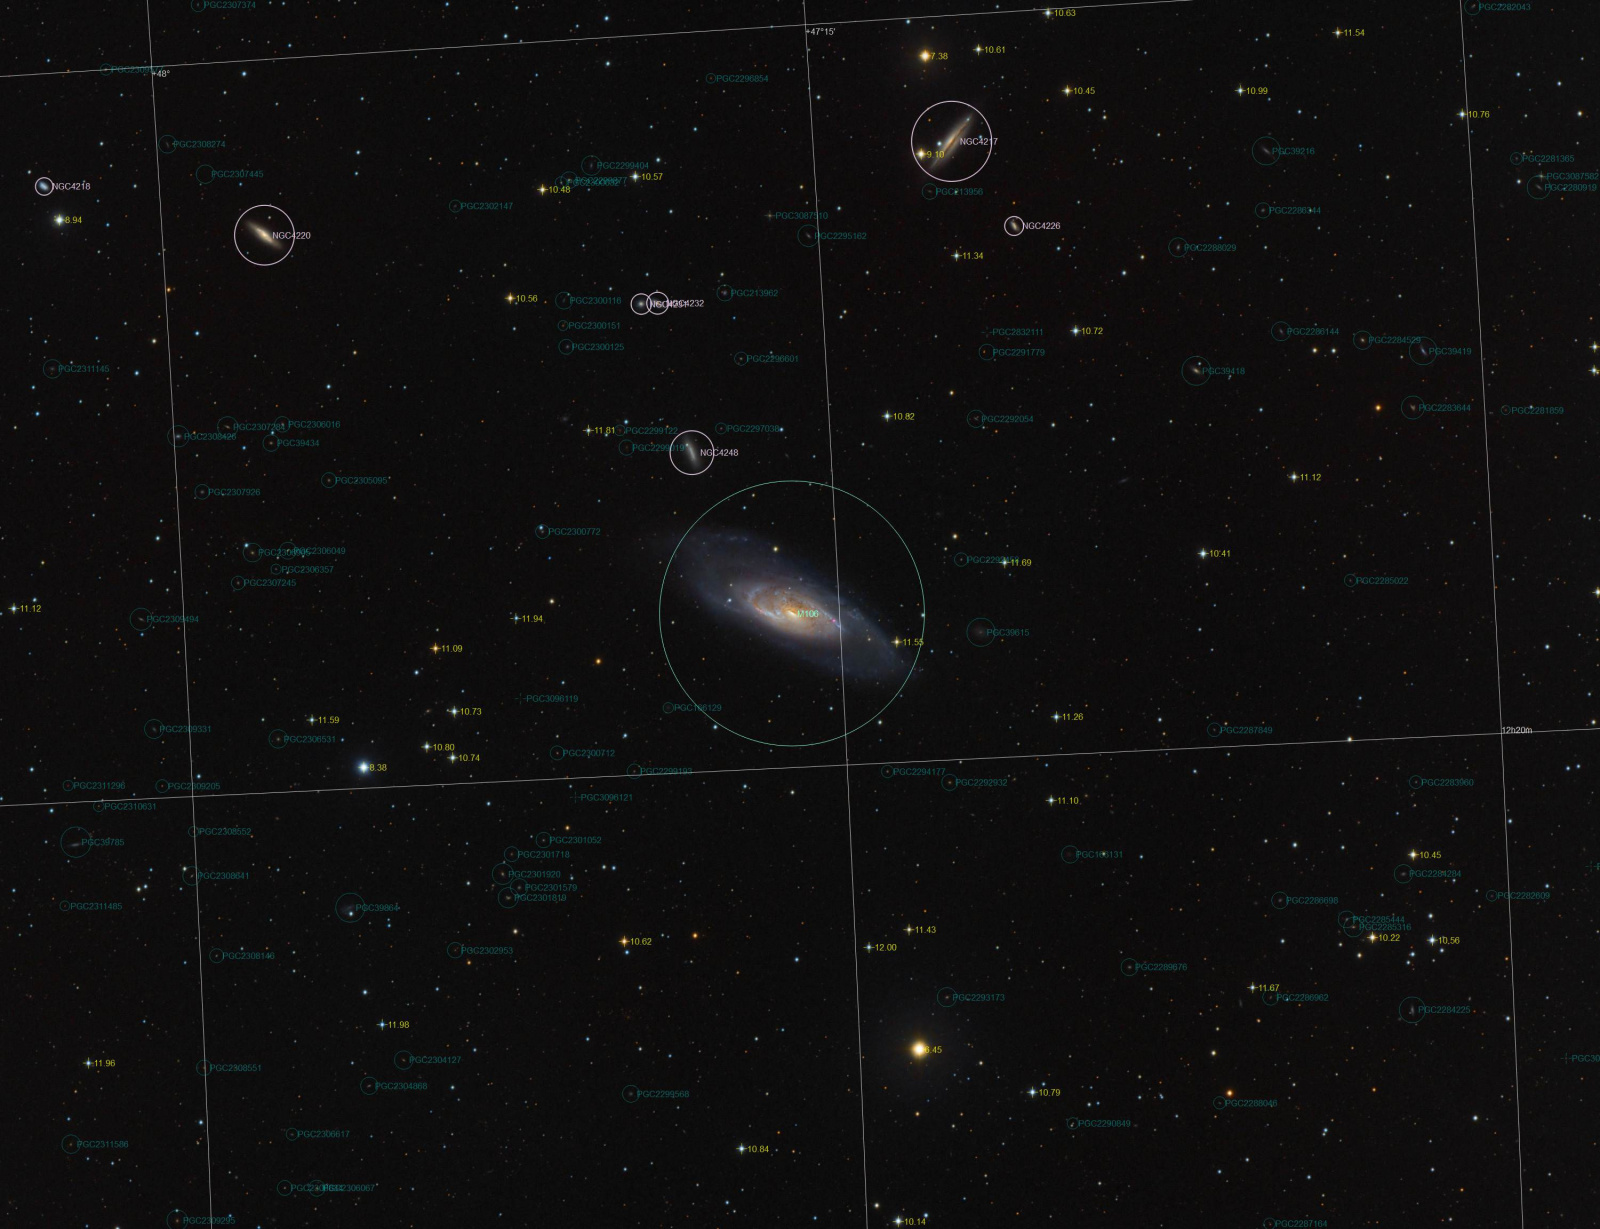 m106_2020_T_3000_Annotated.jpg